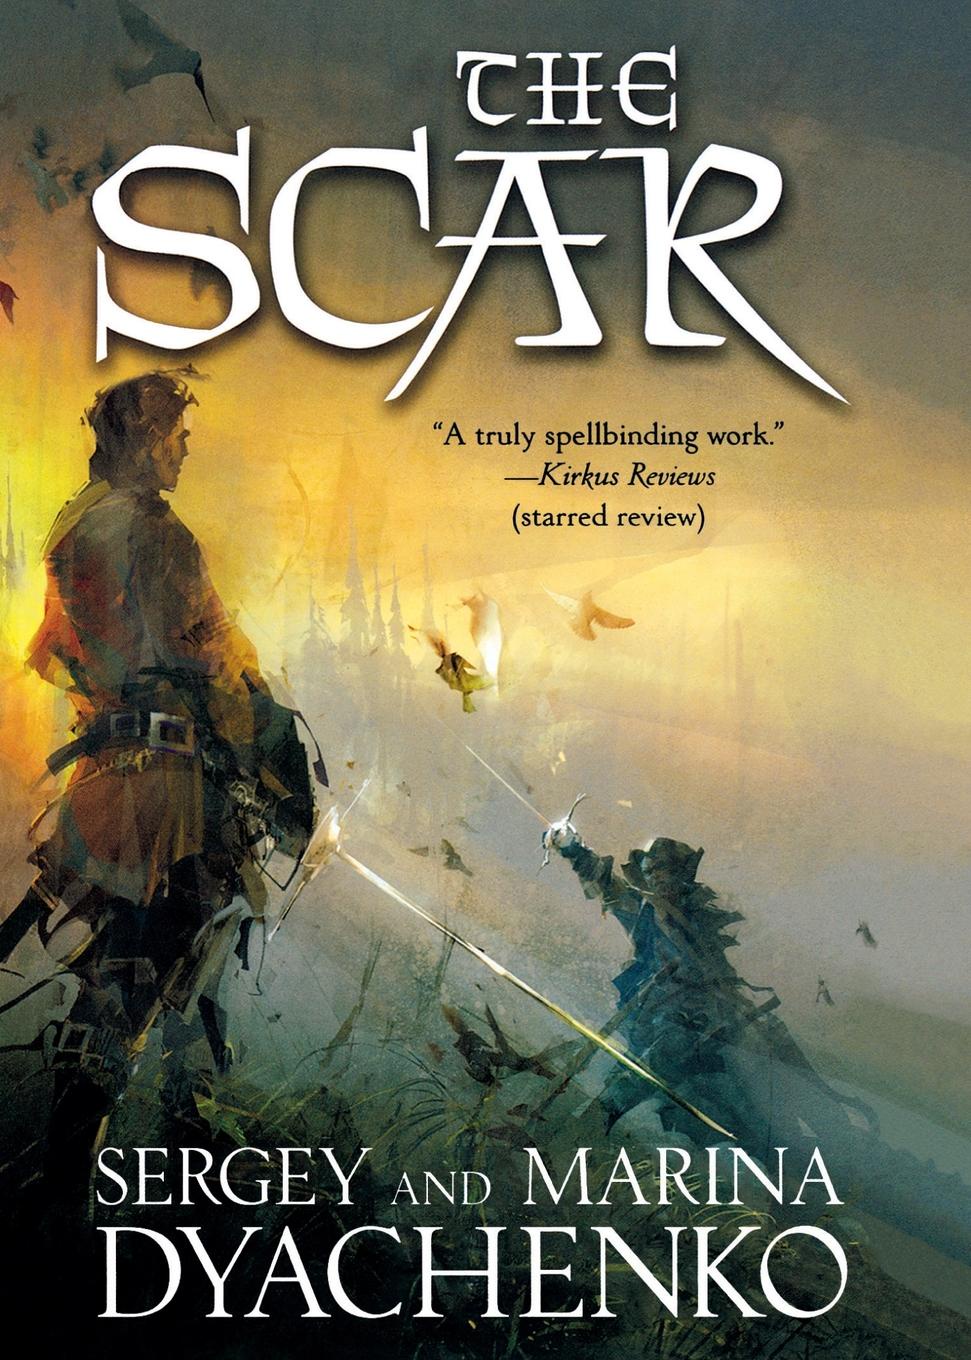 Scary read. Дяченко шрам. The man with the scar book. Scar pdf.